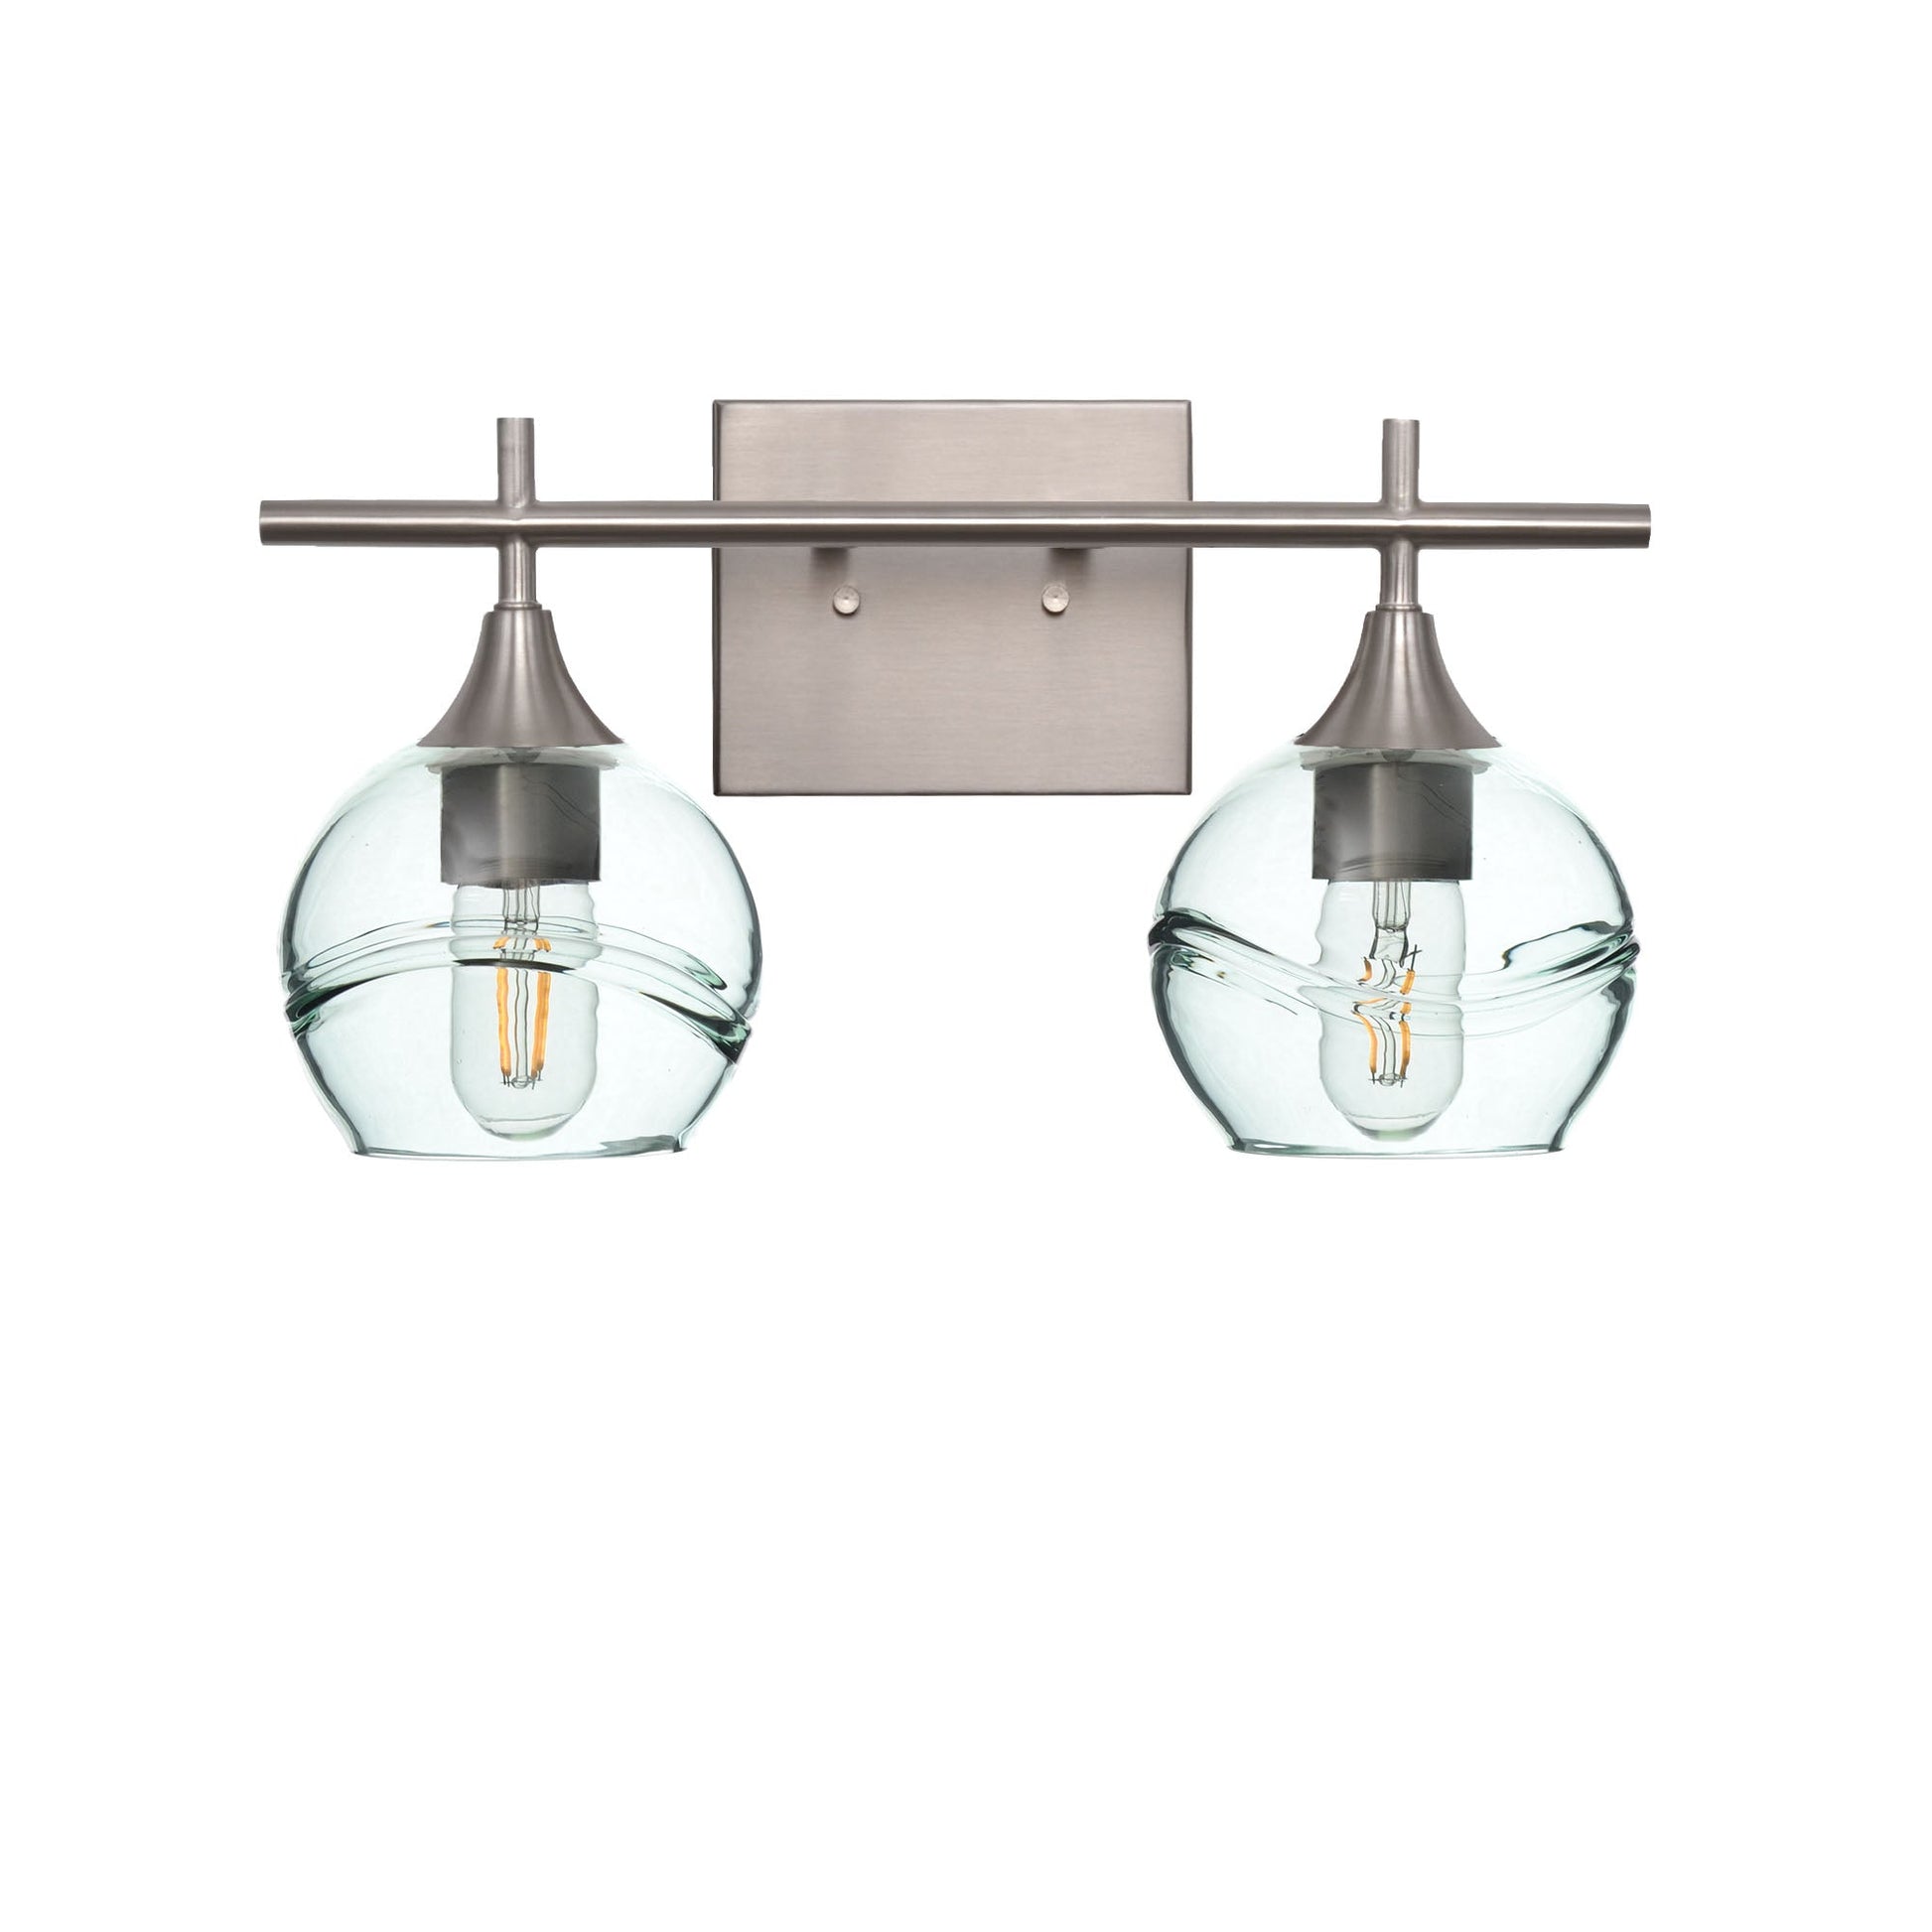 763 Swell: 2 Light Wall Vanity-Glass-Bicycle Glass Co - Hotshop-Eco Clear-Brushed Nickel-Bicycle Glass Co